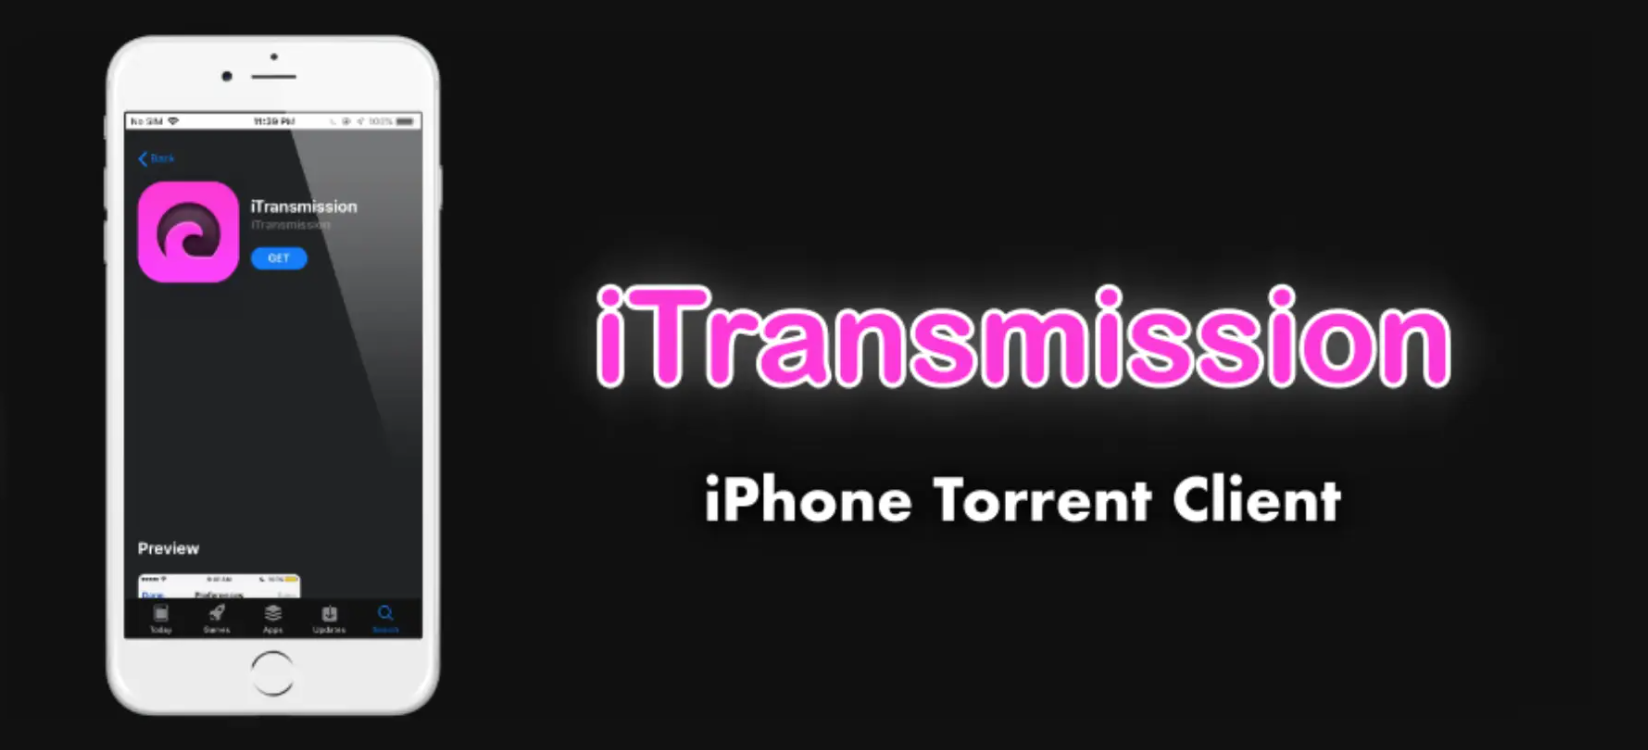 iTransmission - a Torrent client for iOS